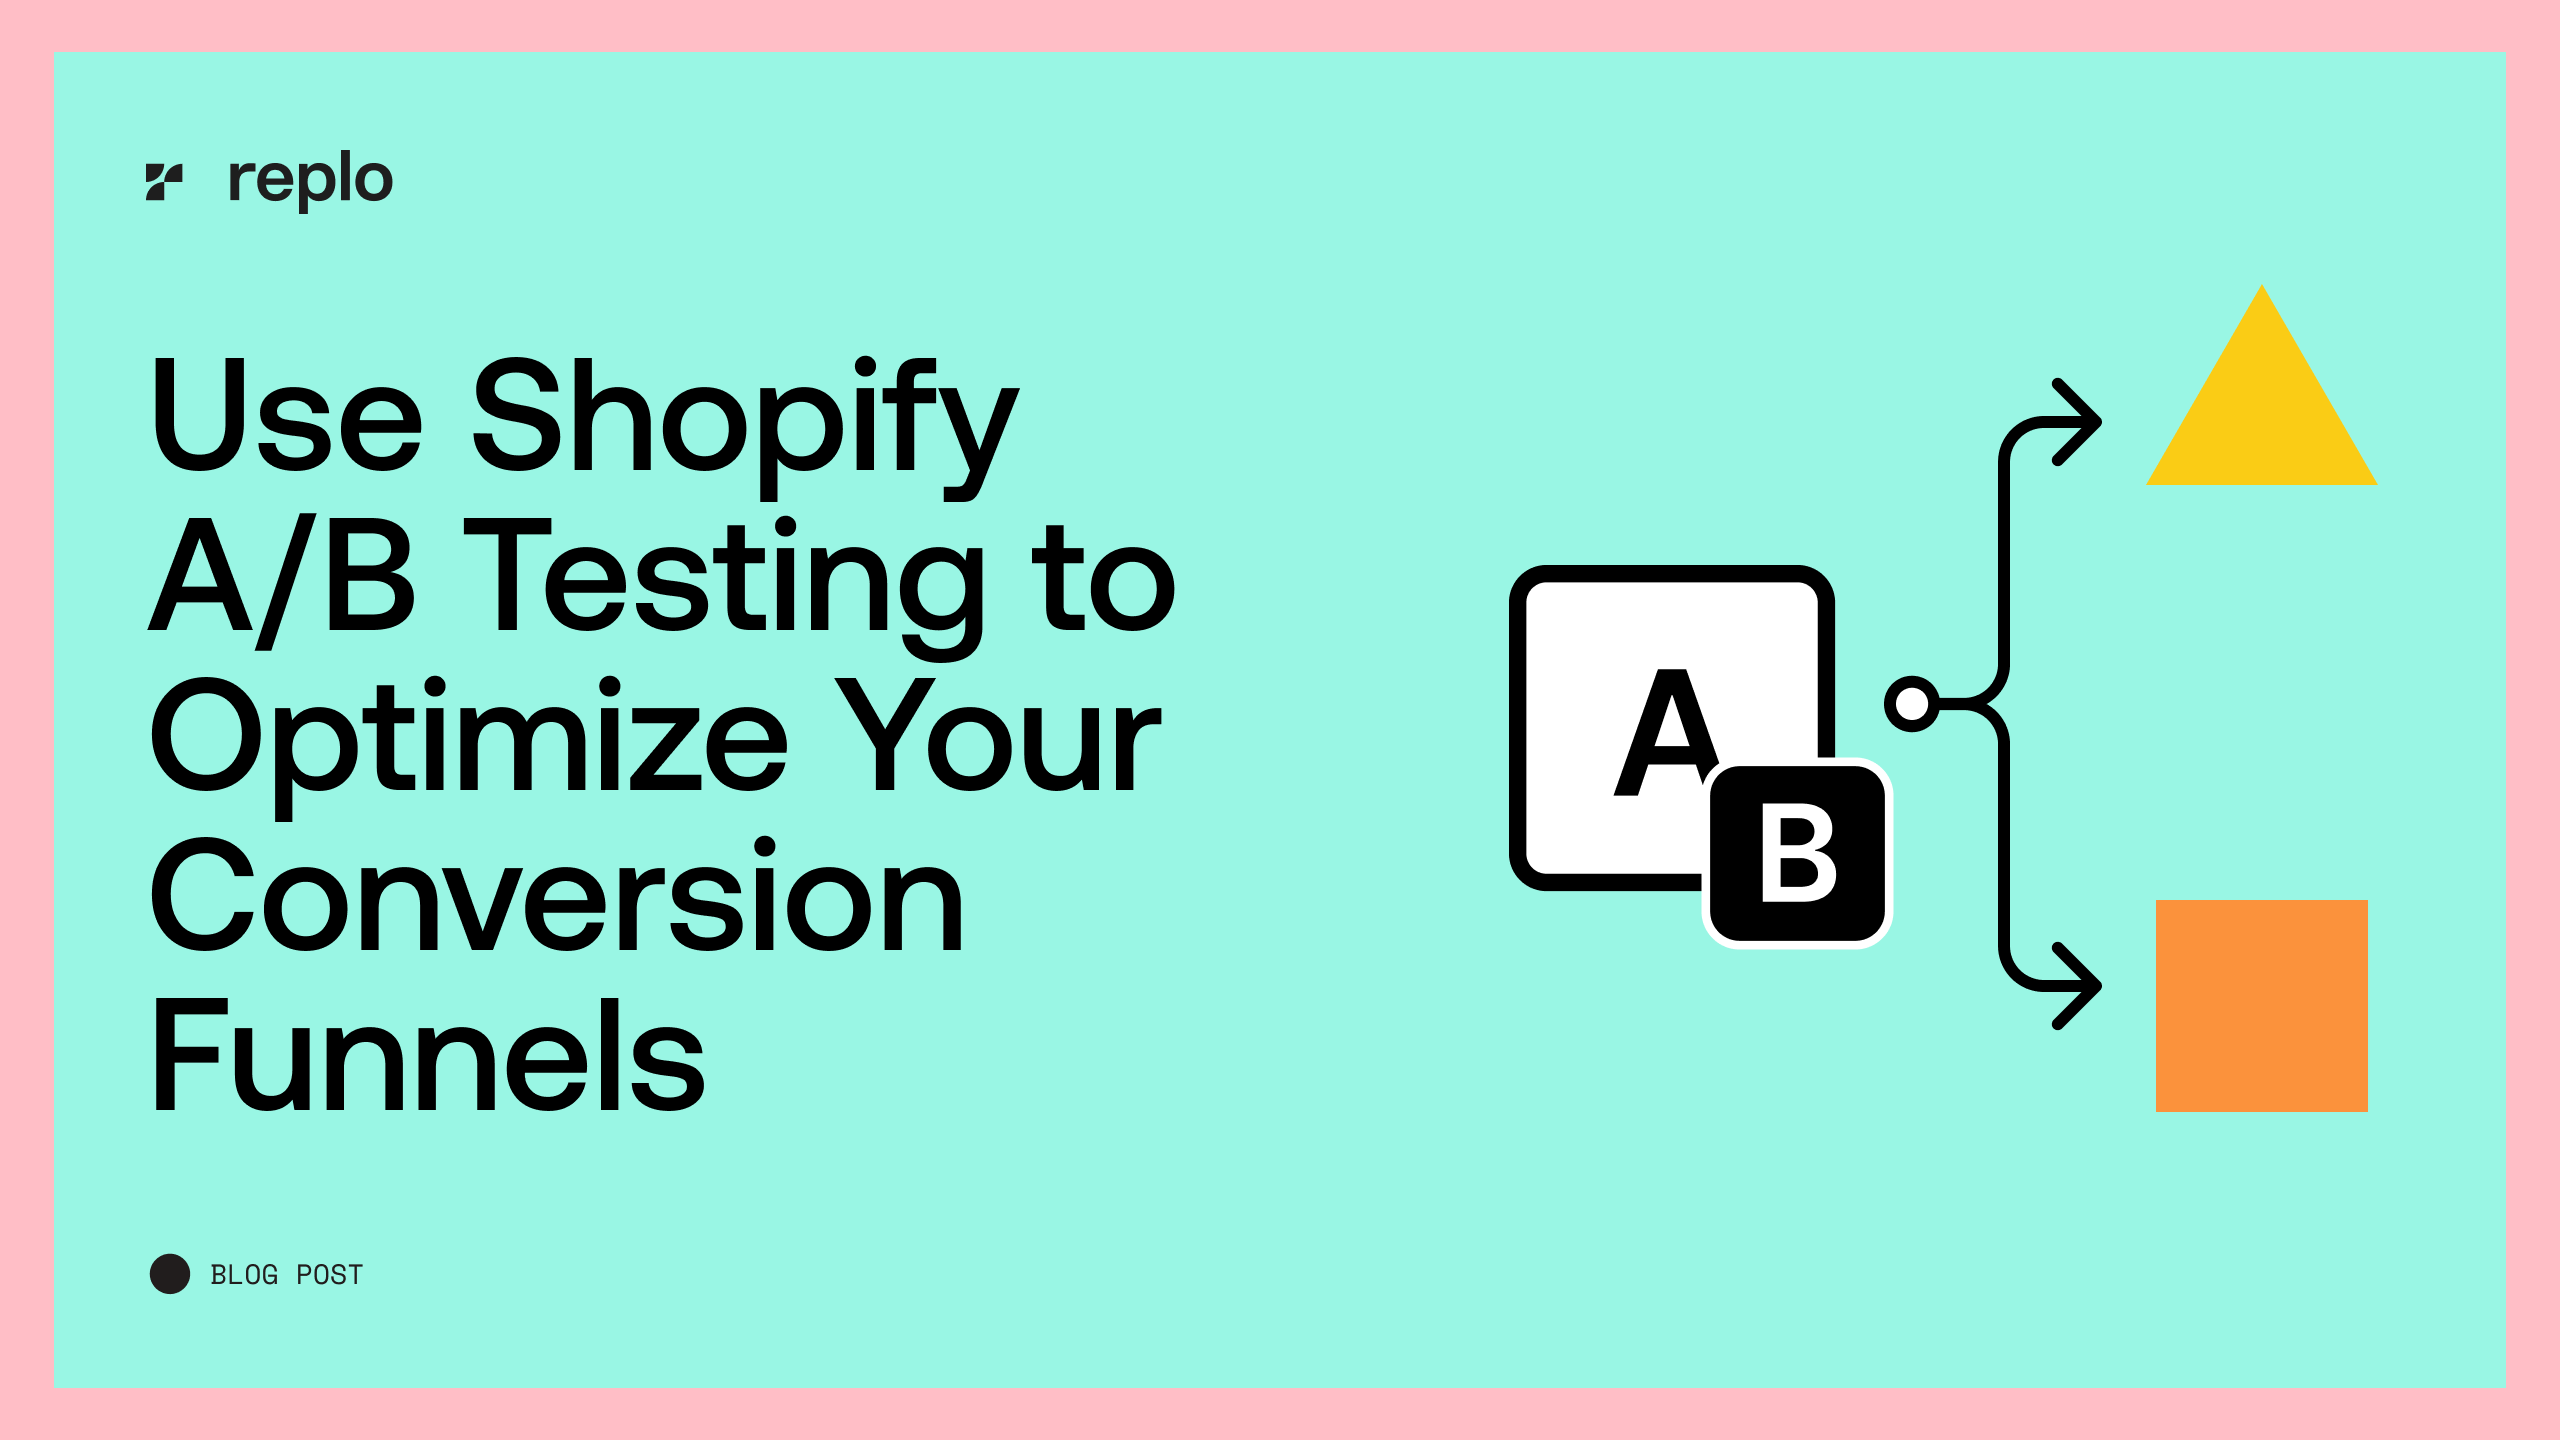 Use Shopify A/B Testing to Optimize Your Conversion Funnel 